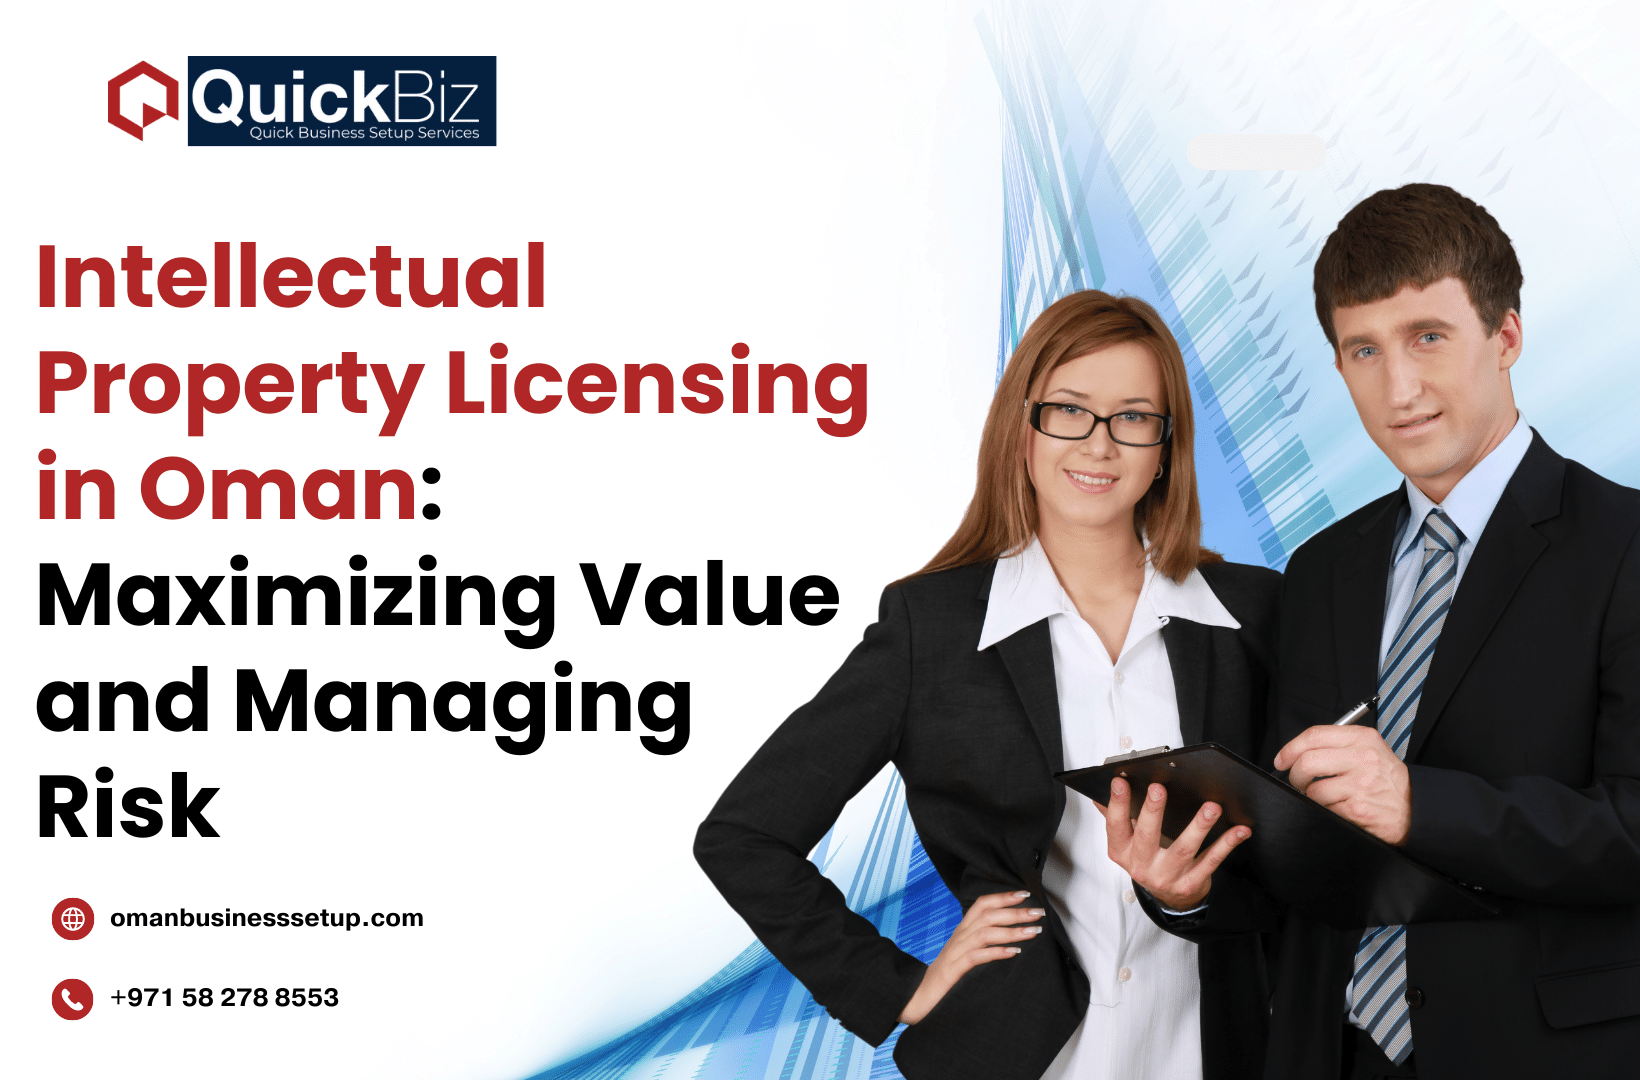 Intellectual Property Licensing in Oman Maximizing Value and Managing Risk